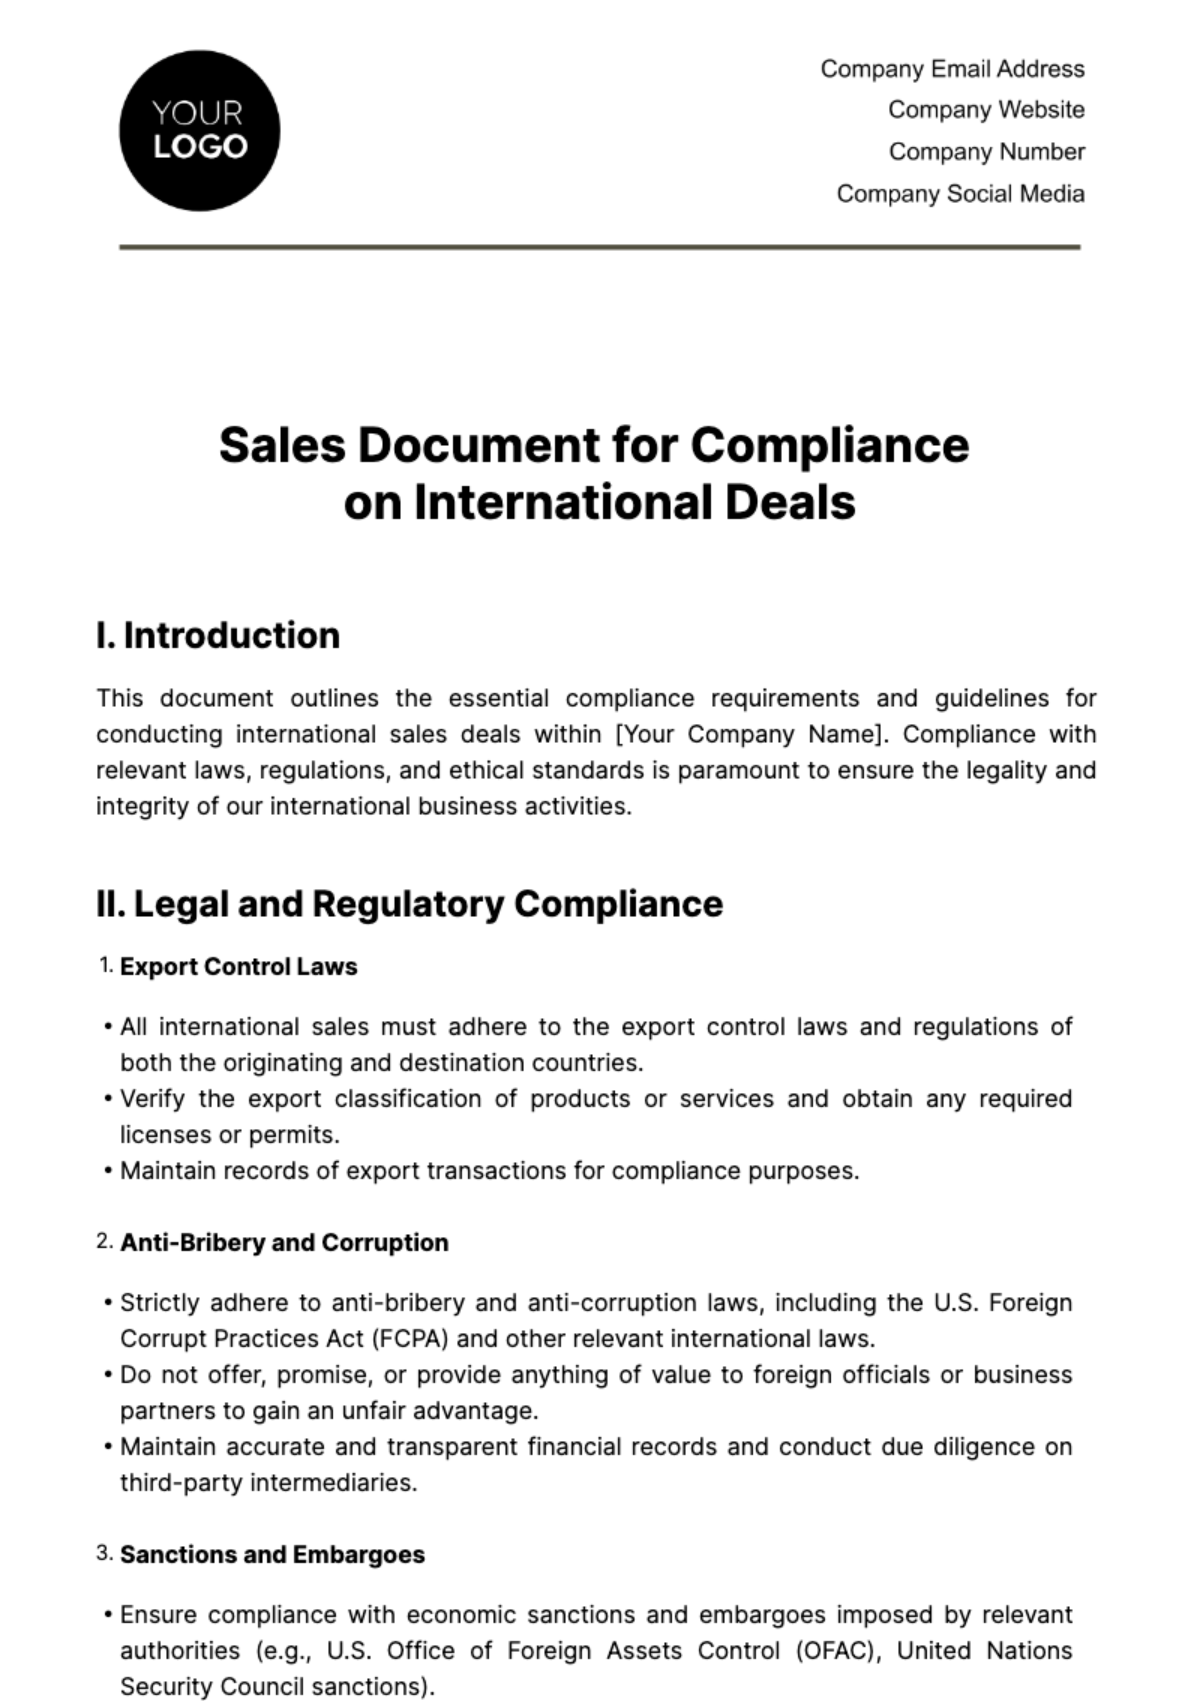 Free Sales Document for Compliance on International Deals Template